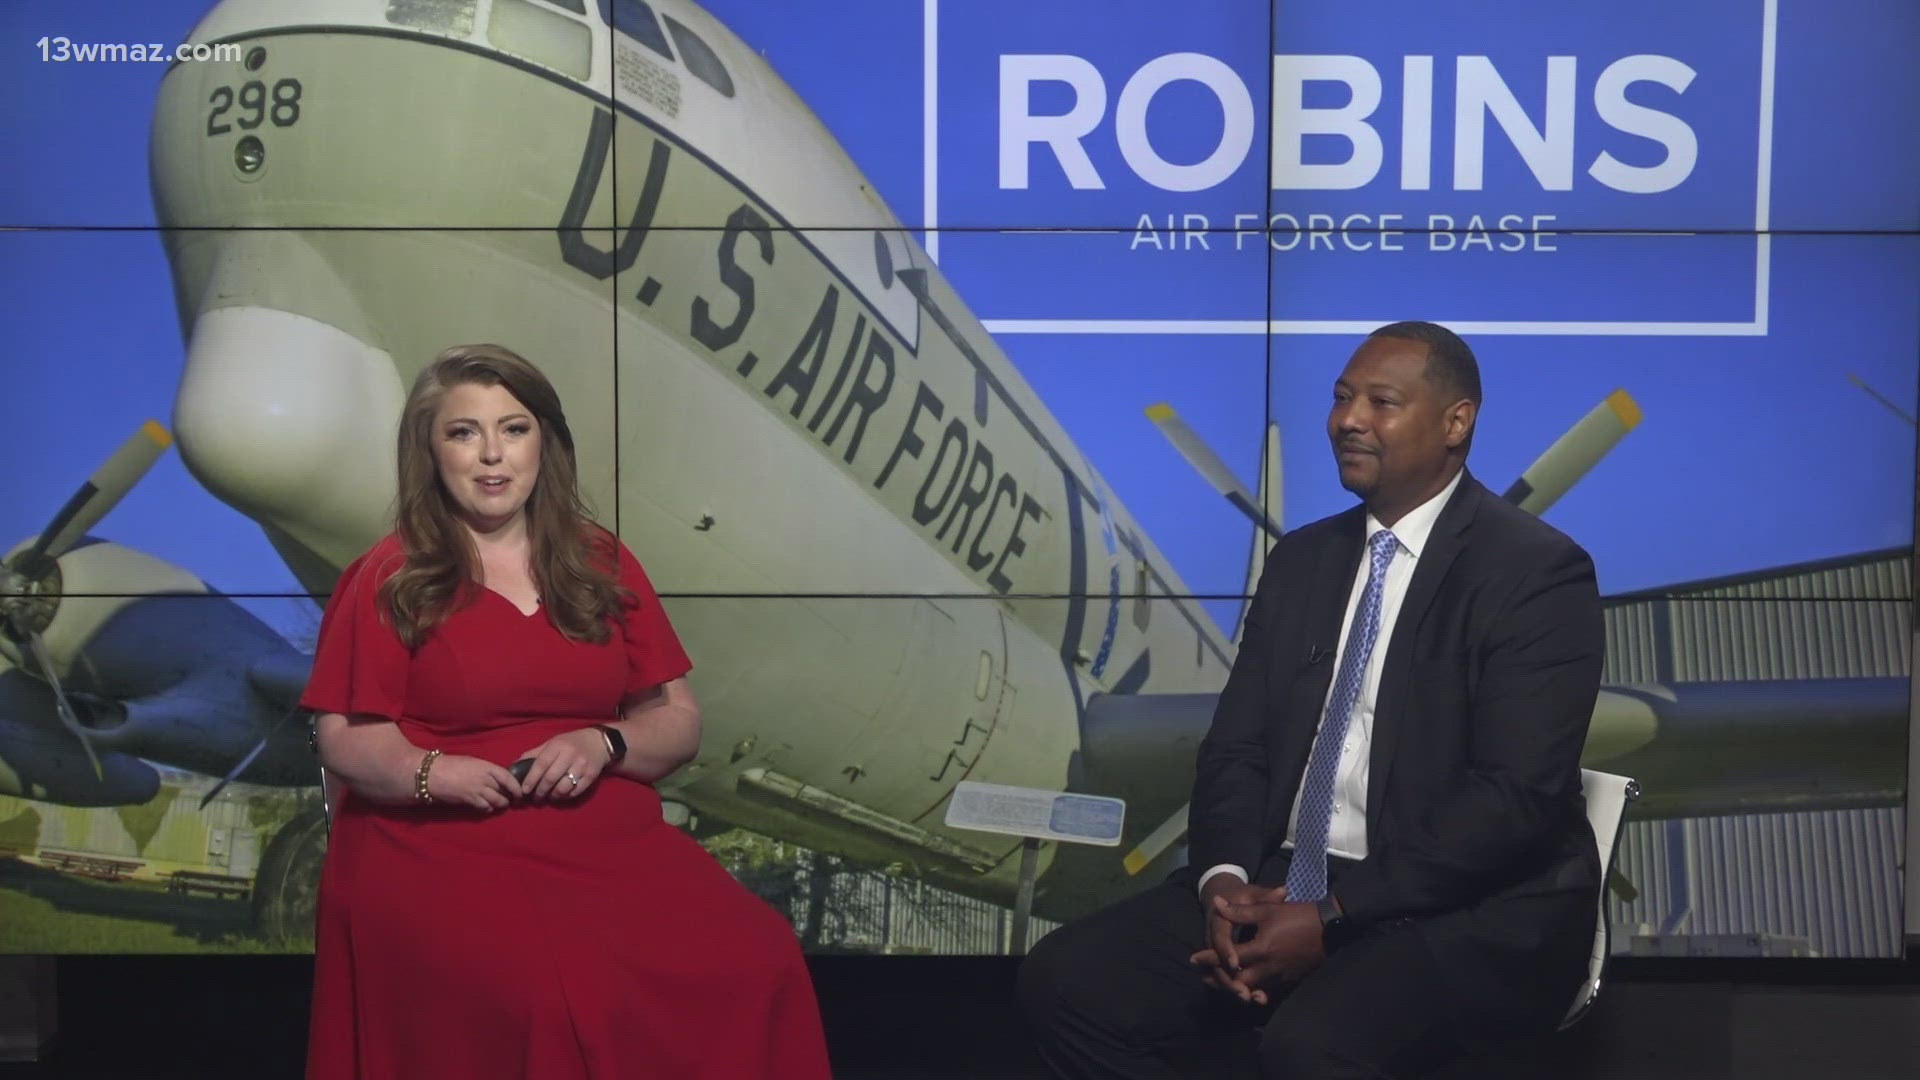 Robins is holding a major hiring event at the Museum of Aviation at the end of April.